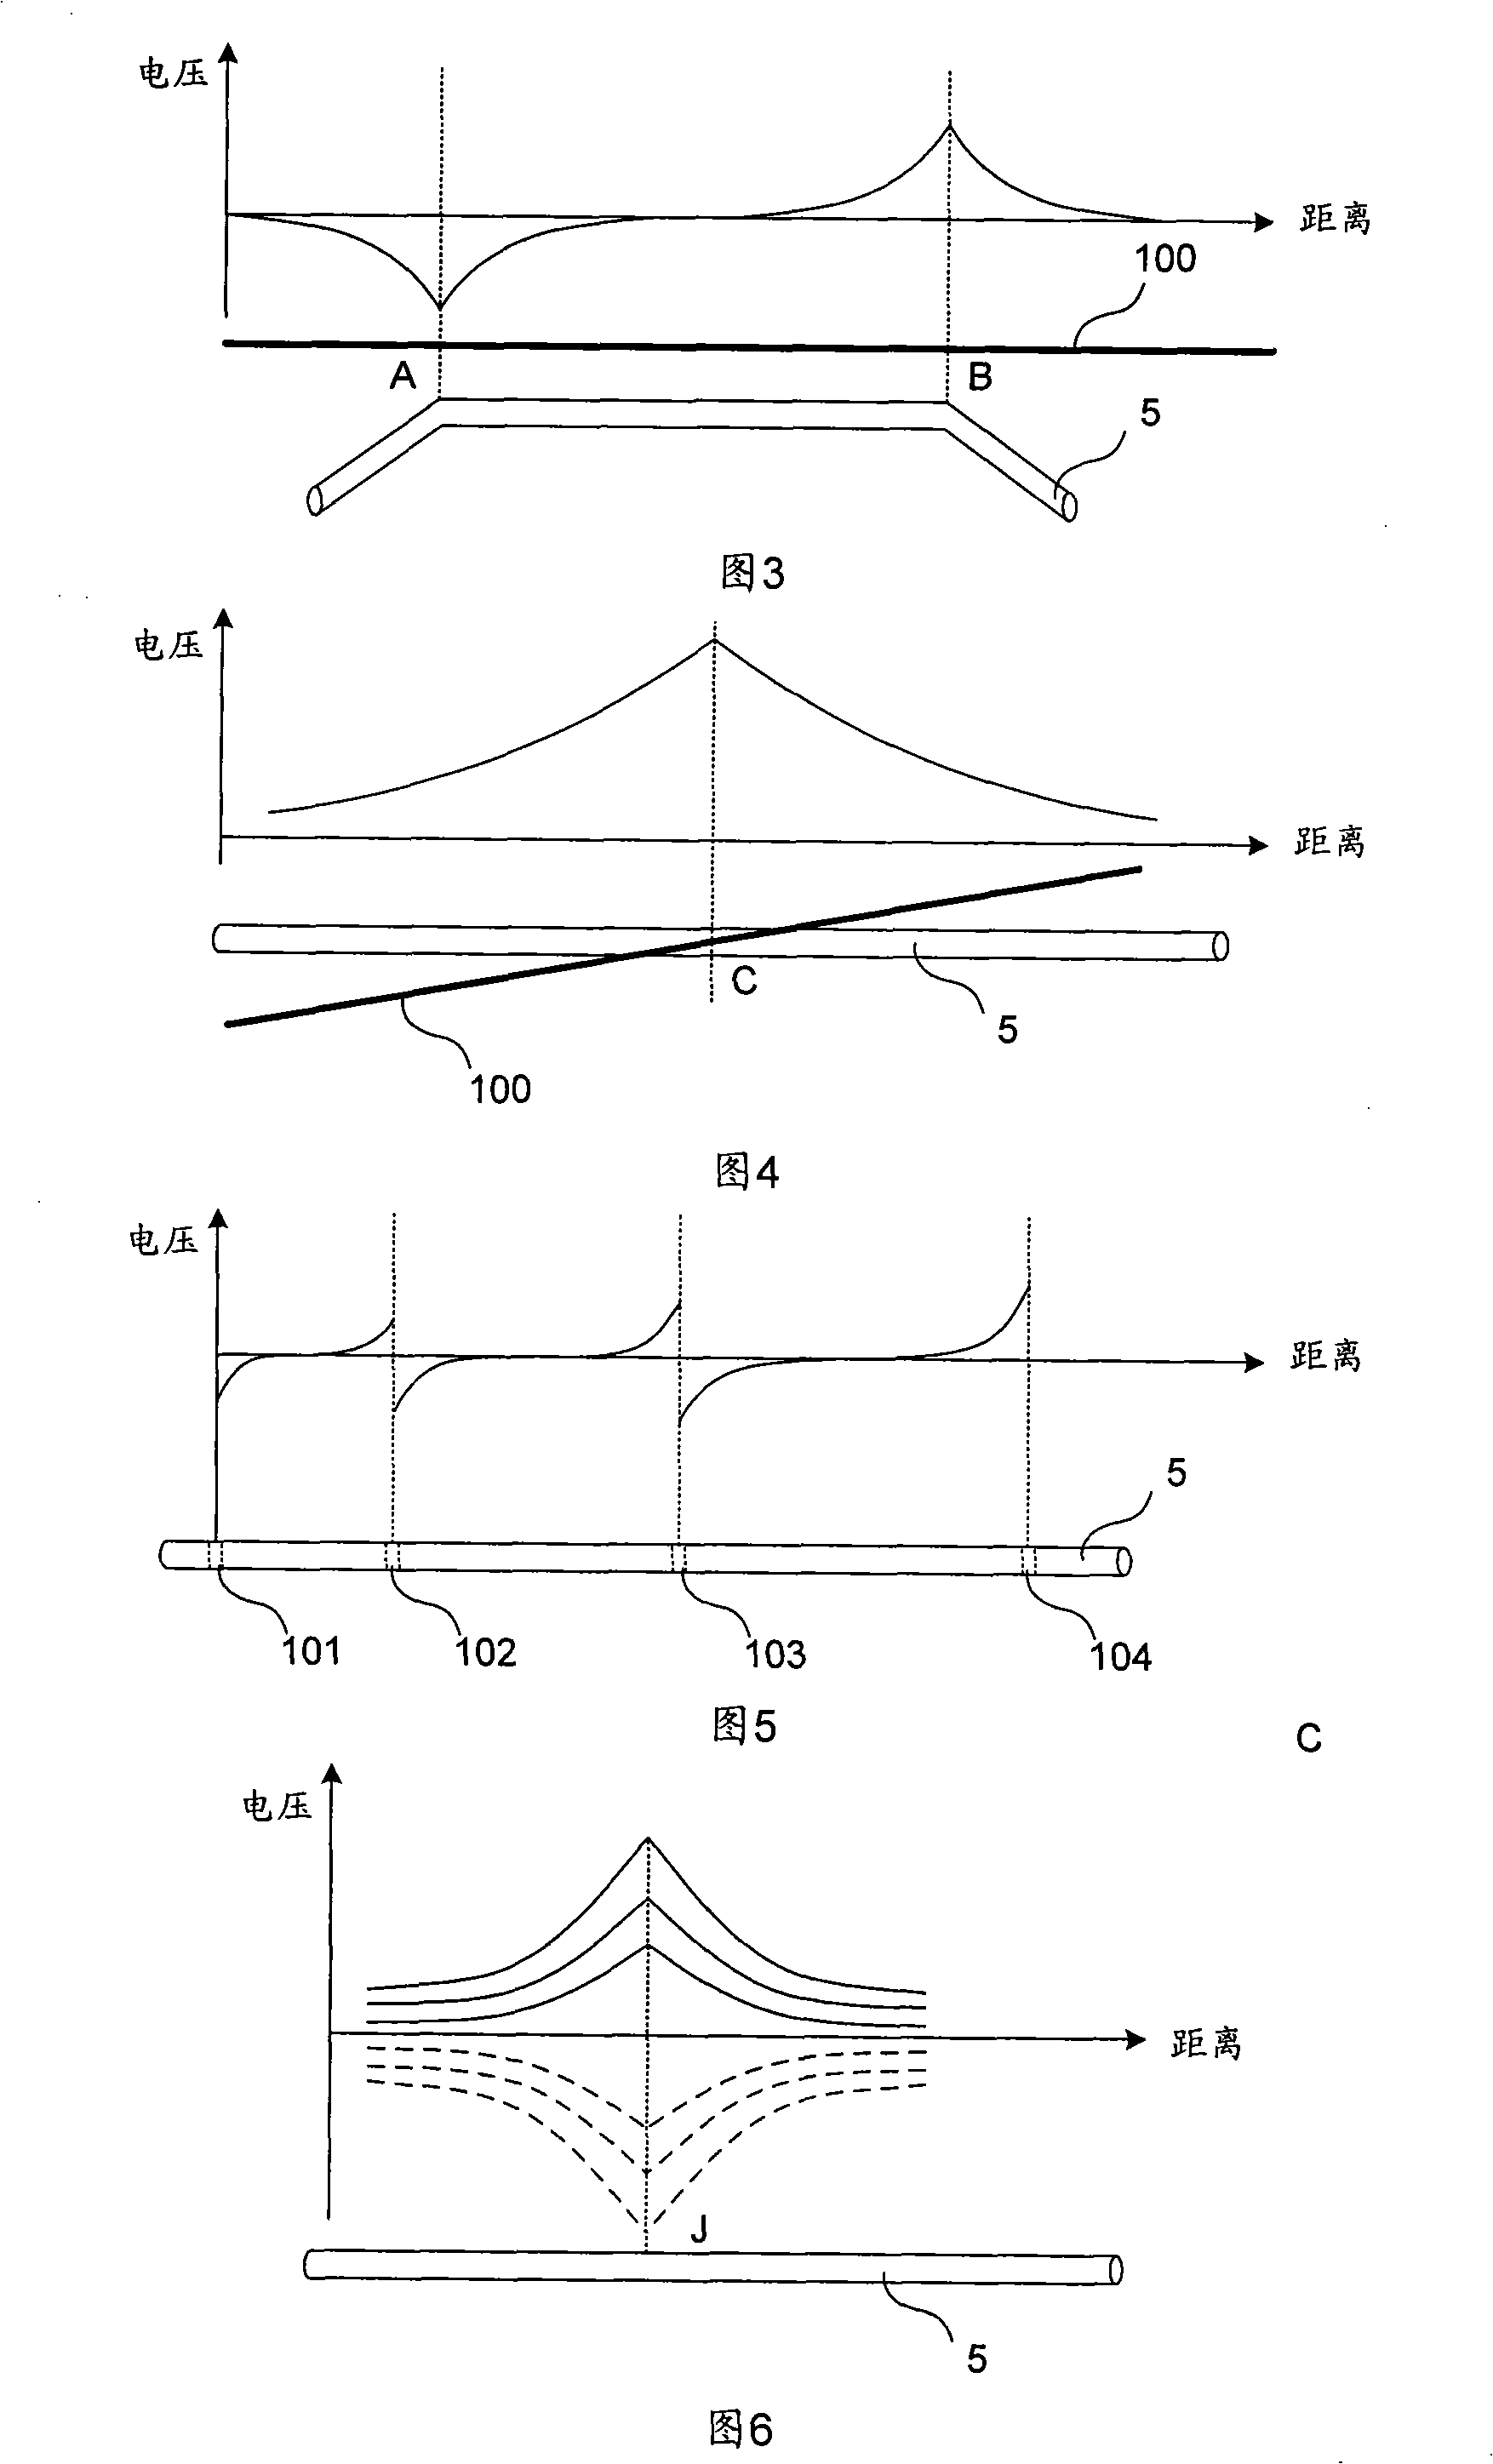 Active interference removing apparatus for buried pipeline